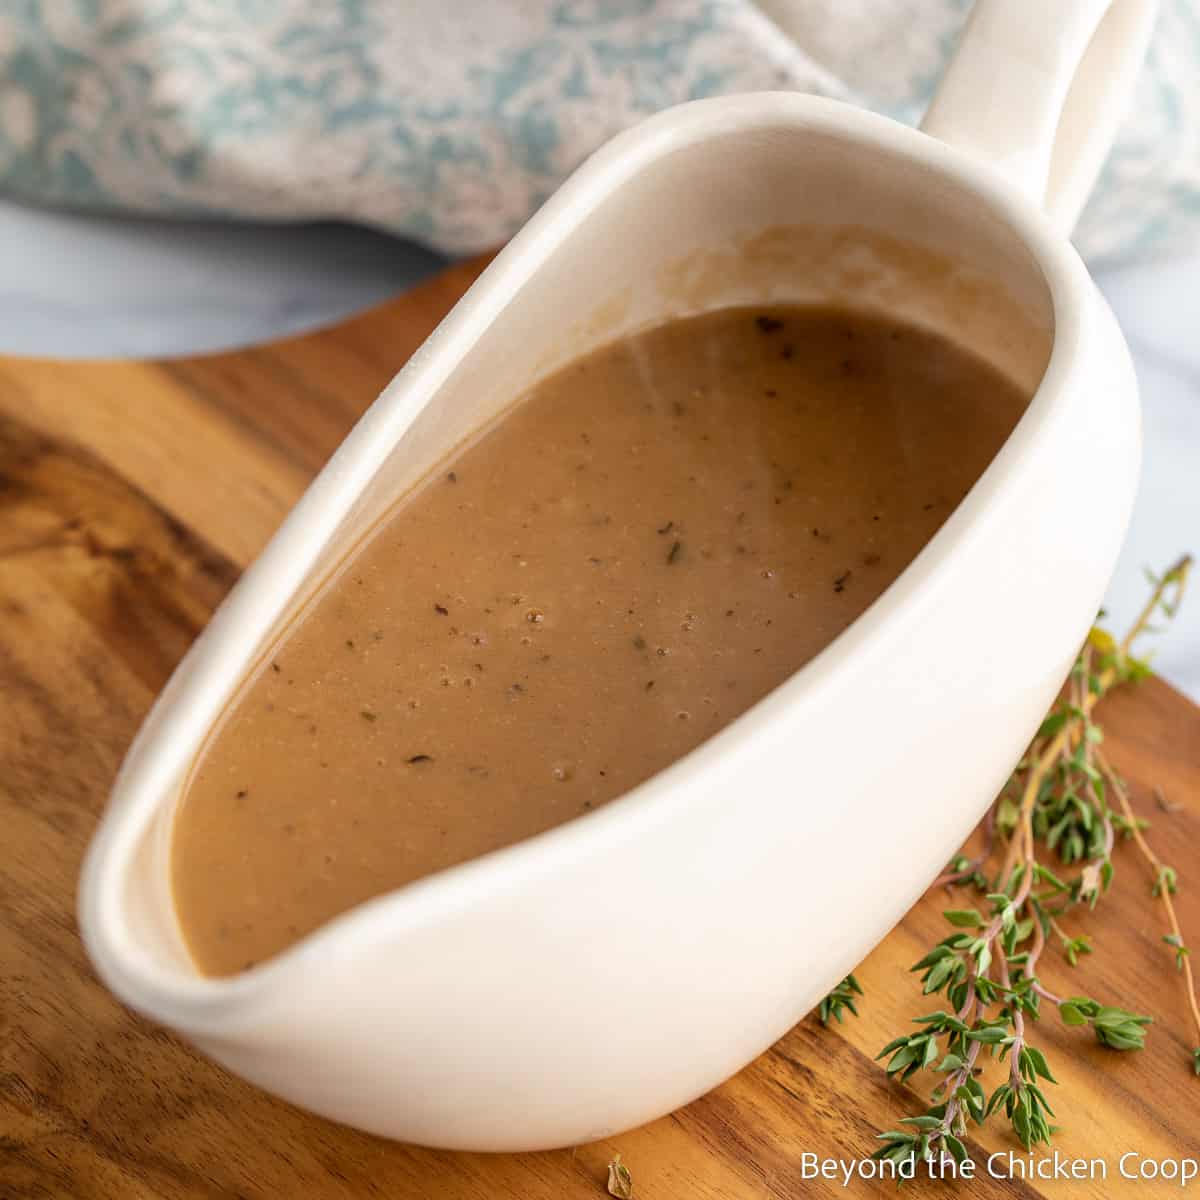 A gravy boat filled with a brown gravy.